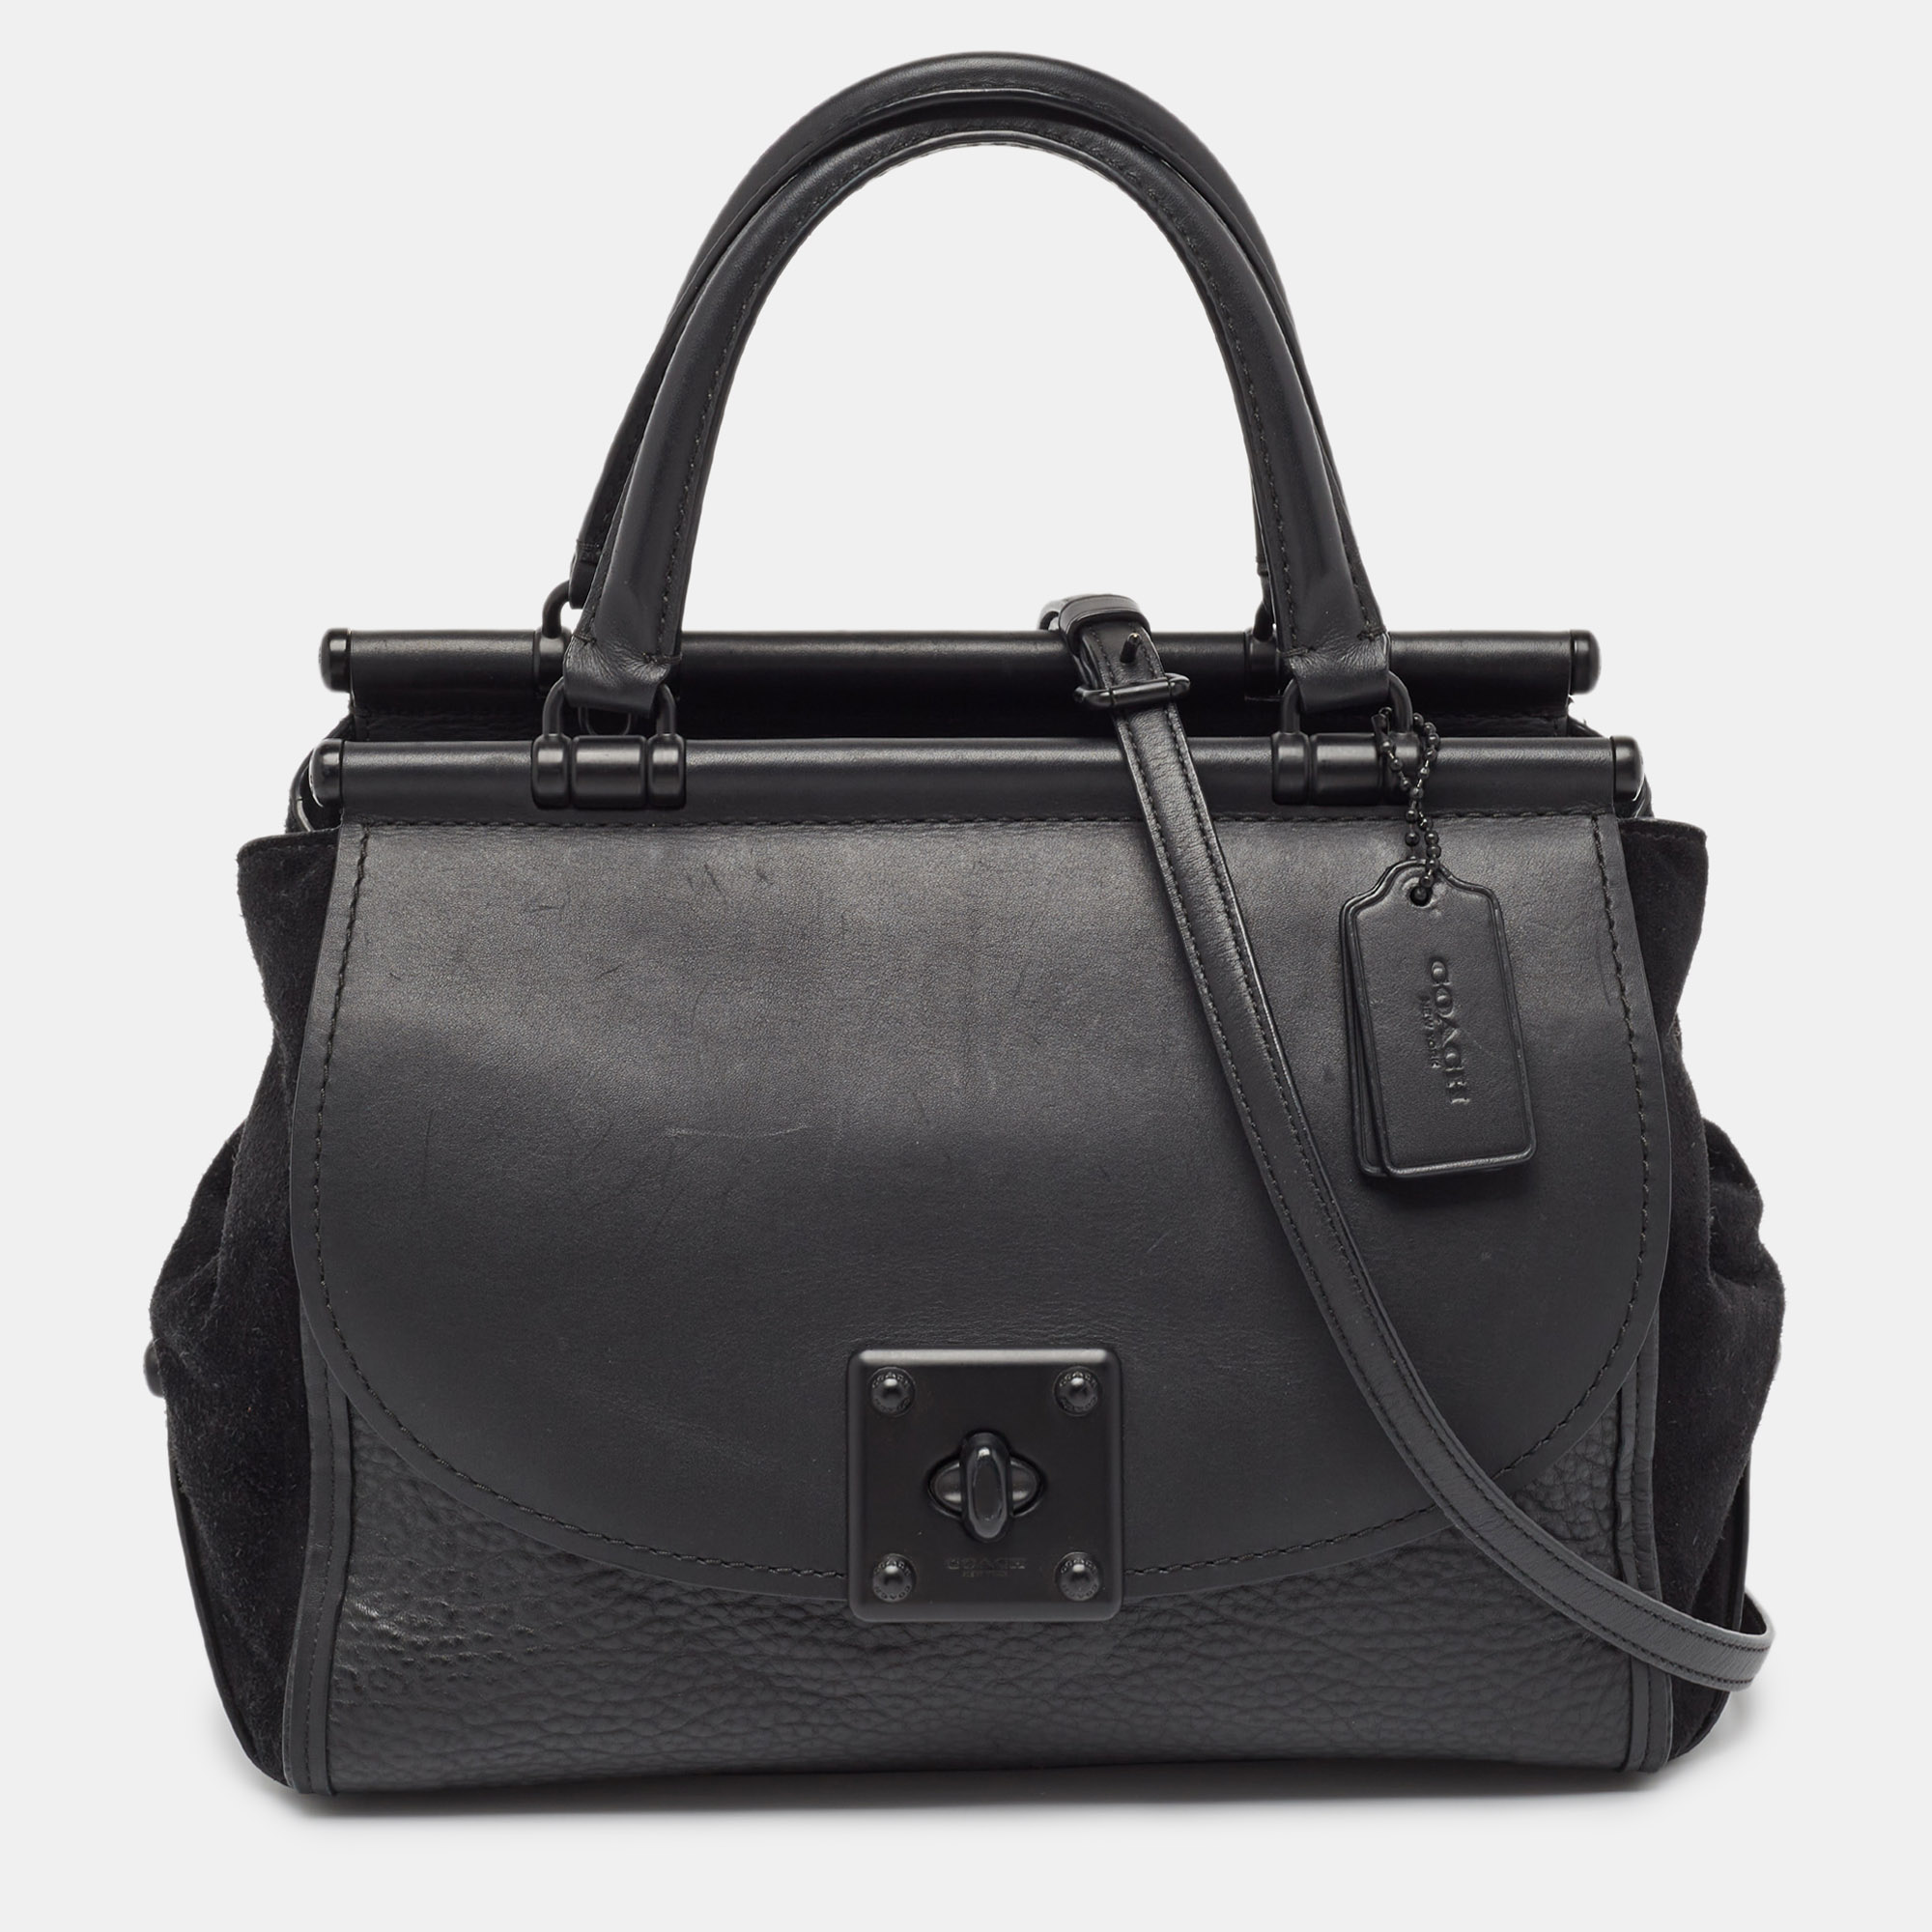 

Coach Black Leather and Suede Drifter Carryall Satchel